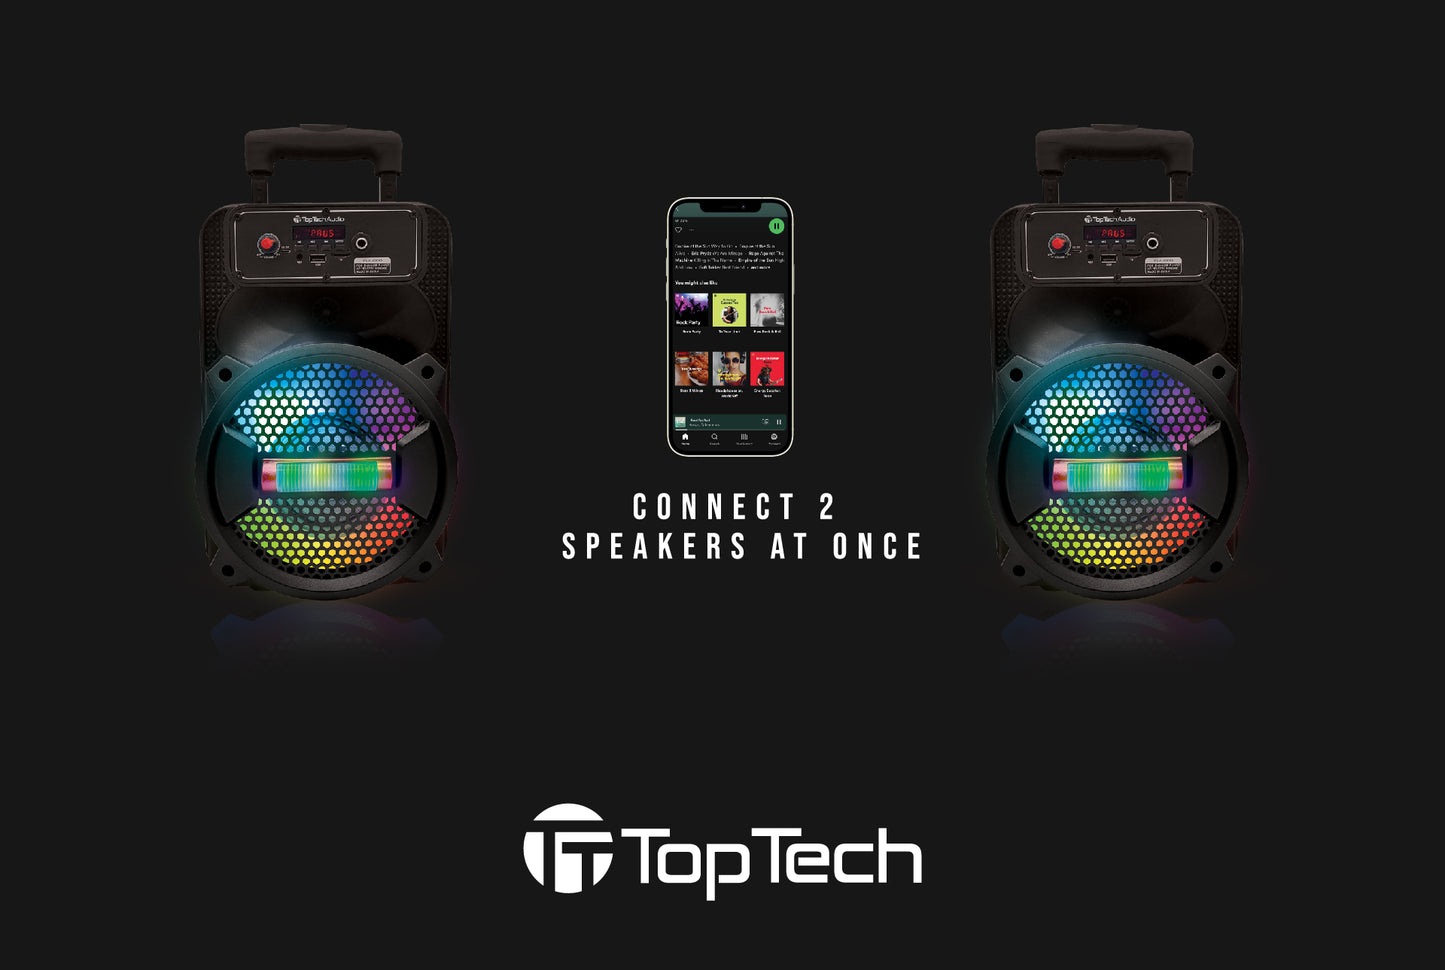 TOPTECH Rock-8, 8 Inch Wireless Bluetooth Speakers Portable Speaker with Mircrophone, Blazing Disco Lights, Remote Control, High-Fidelity Sound, 10M(33ft) Wireless Range,for Home/Party/Outdoor,Gift